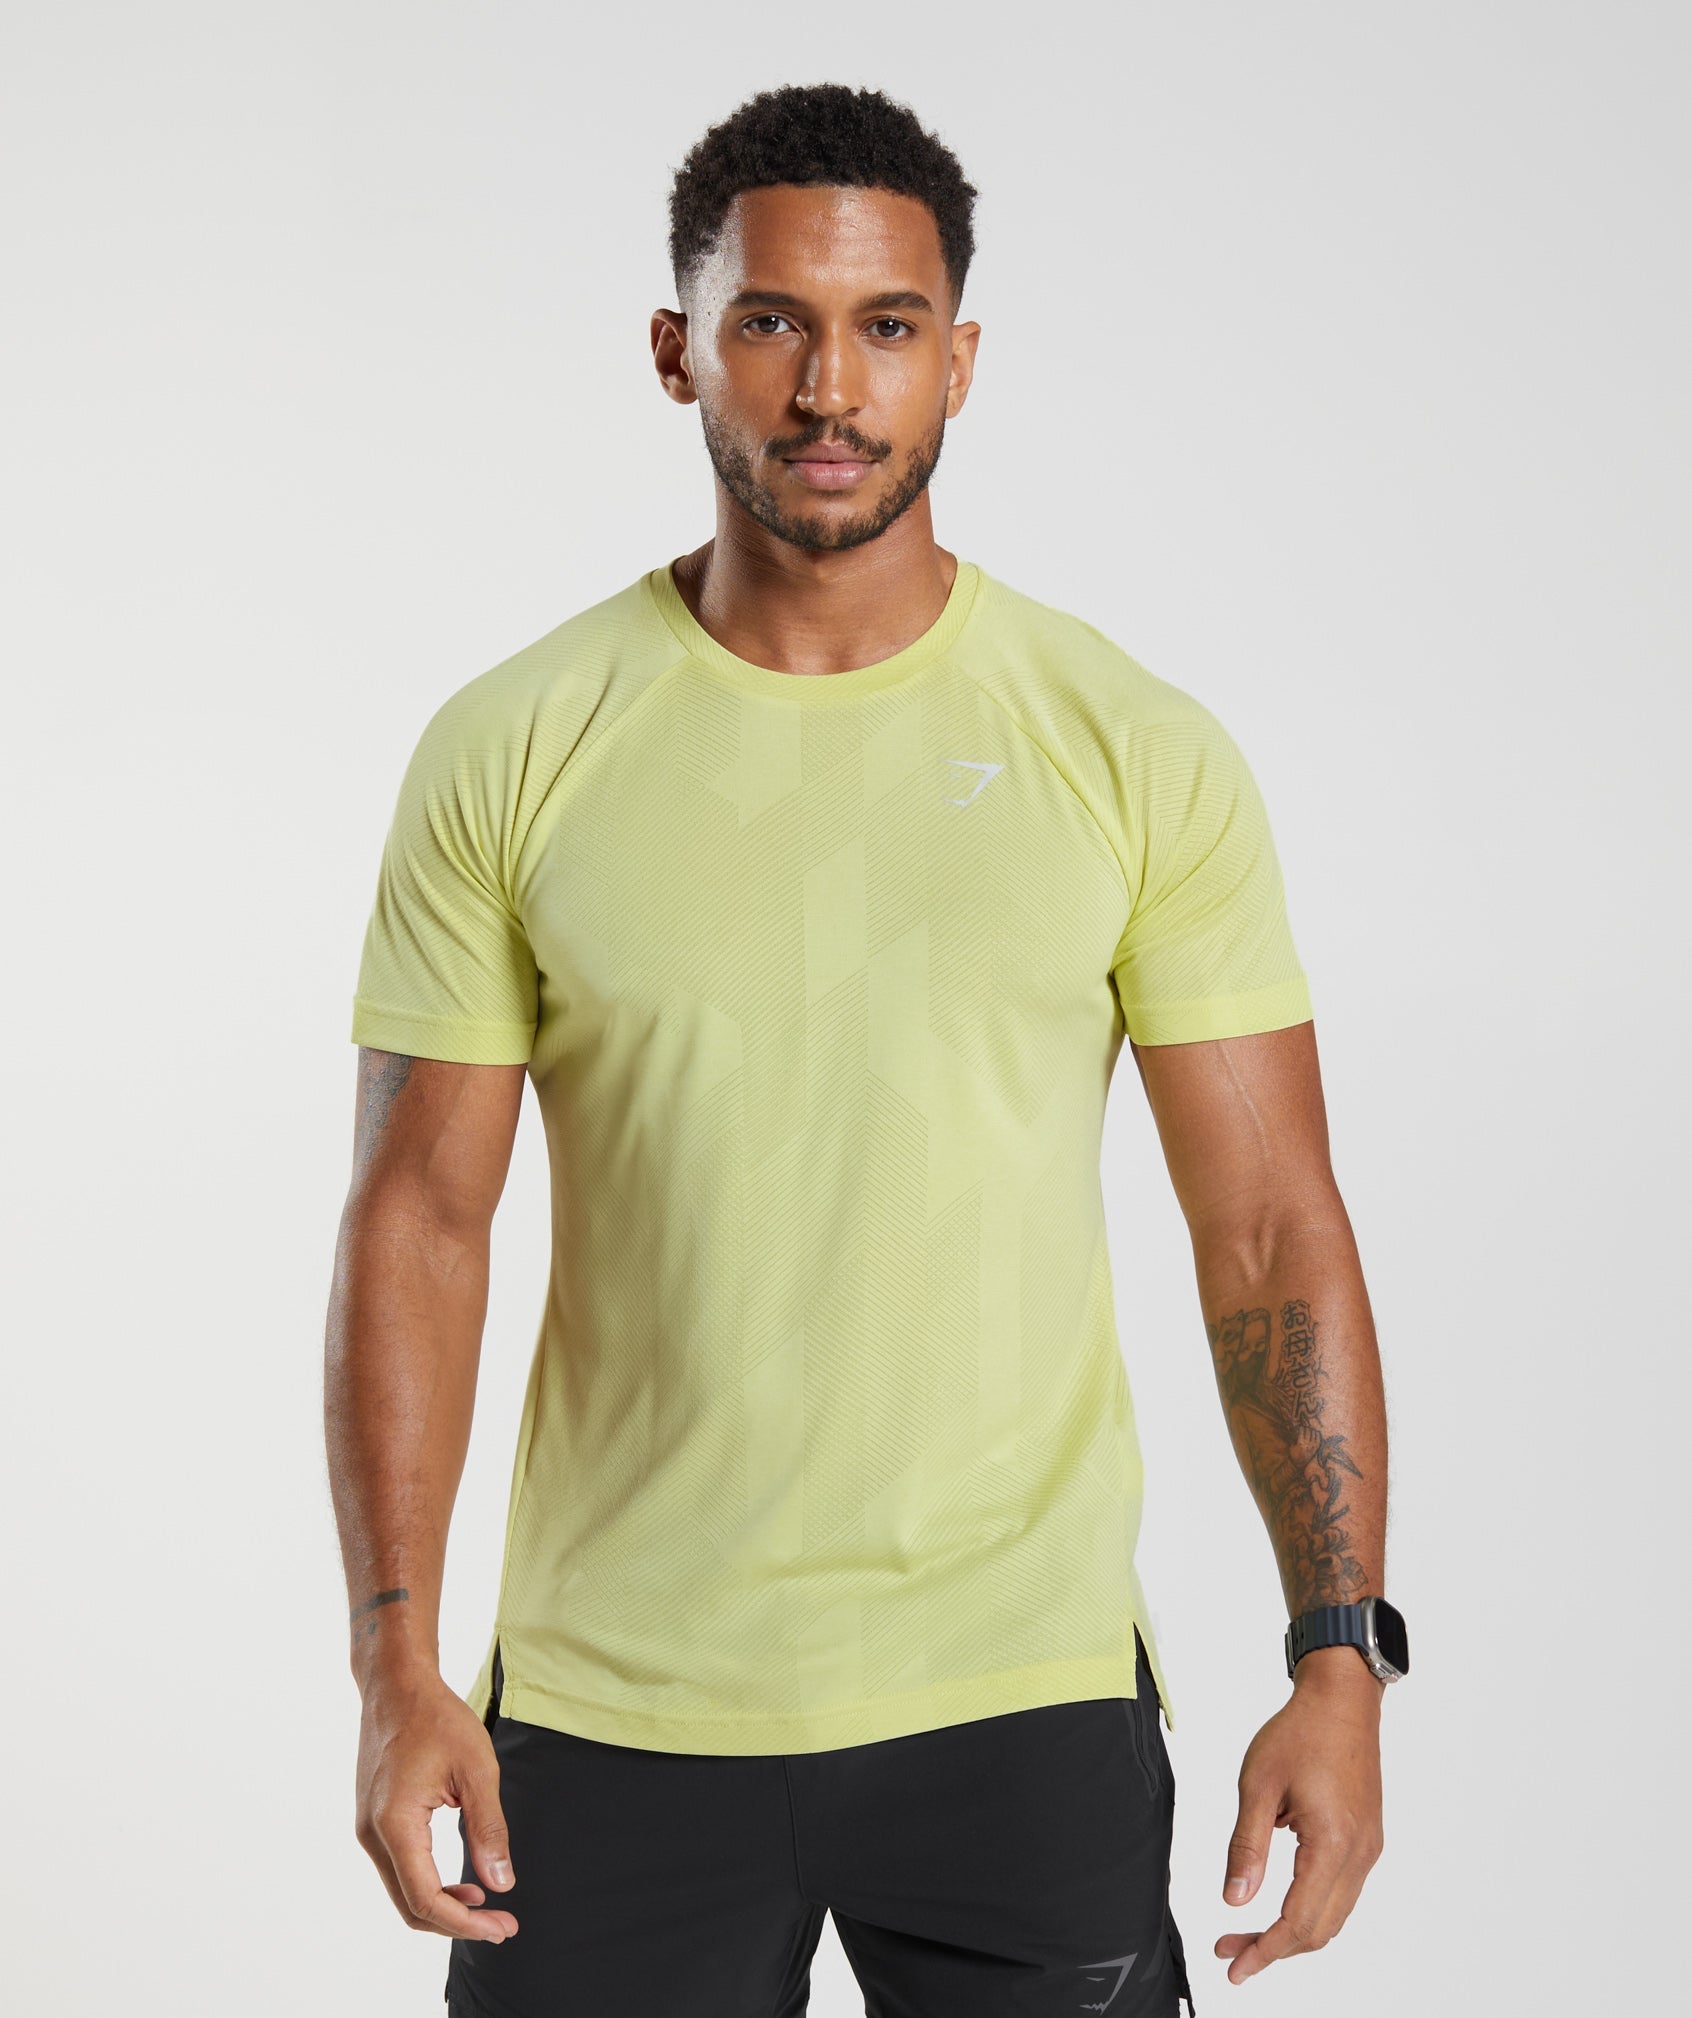 Apex T-Shirt in Firefly Green/White - view 1